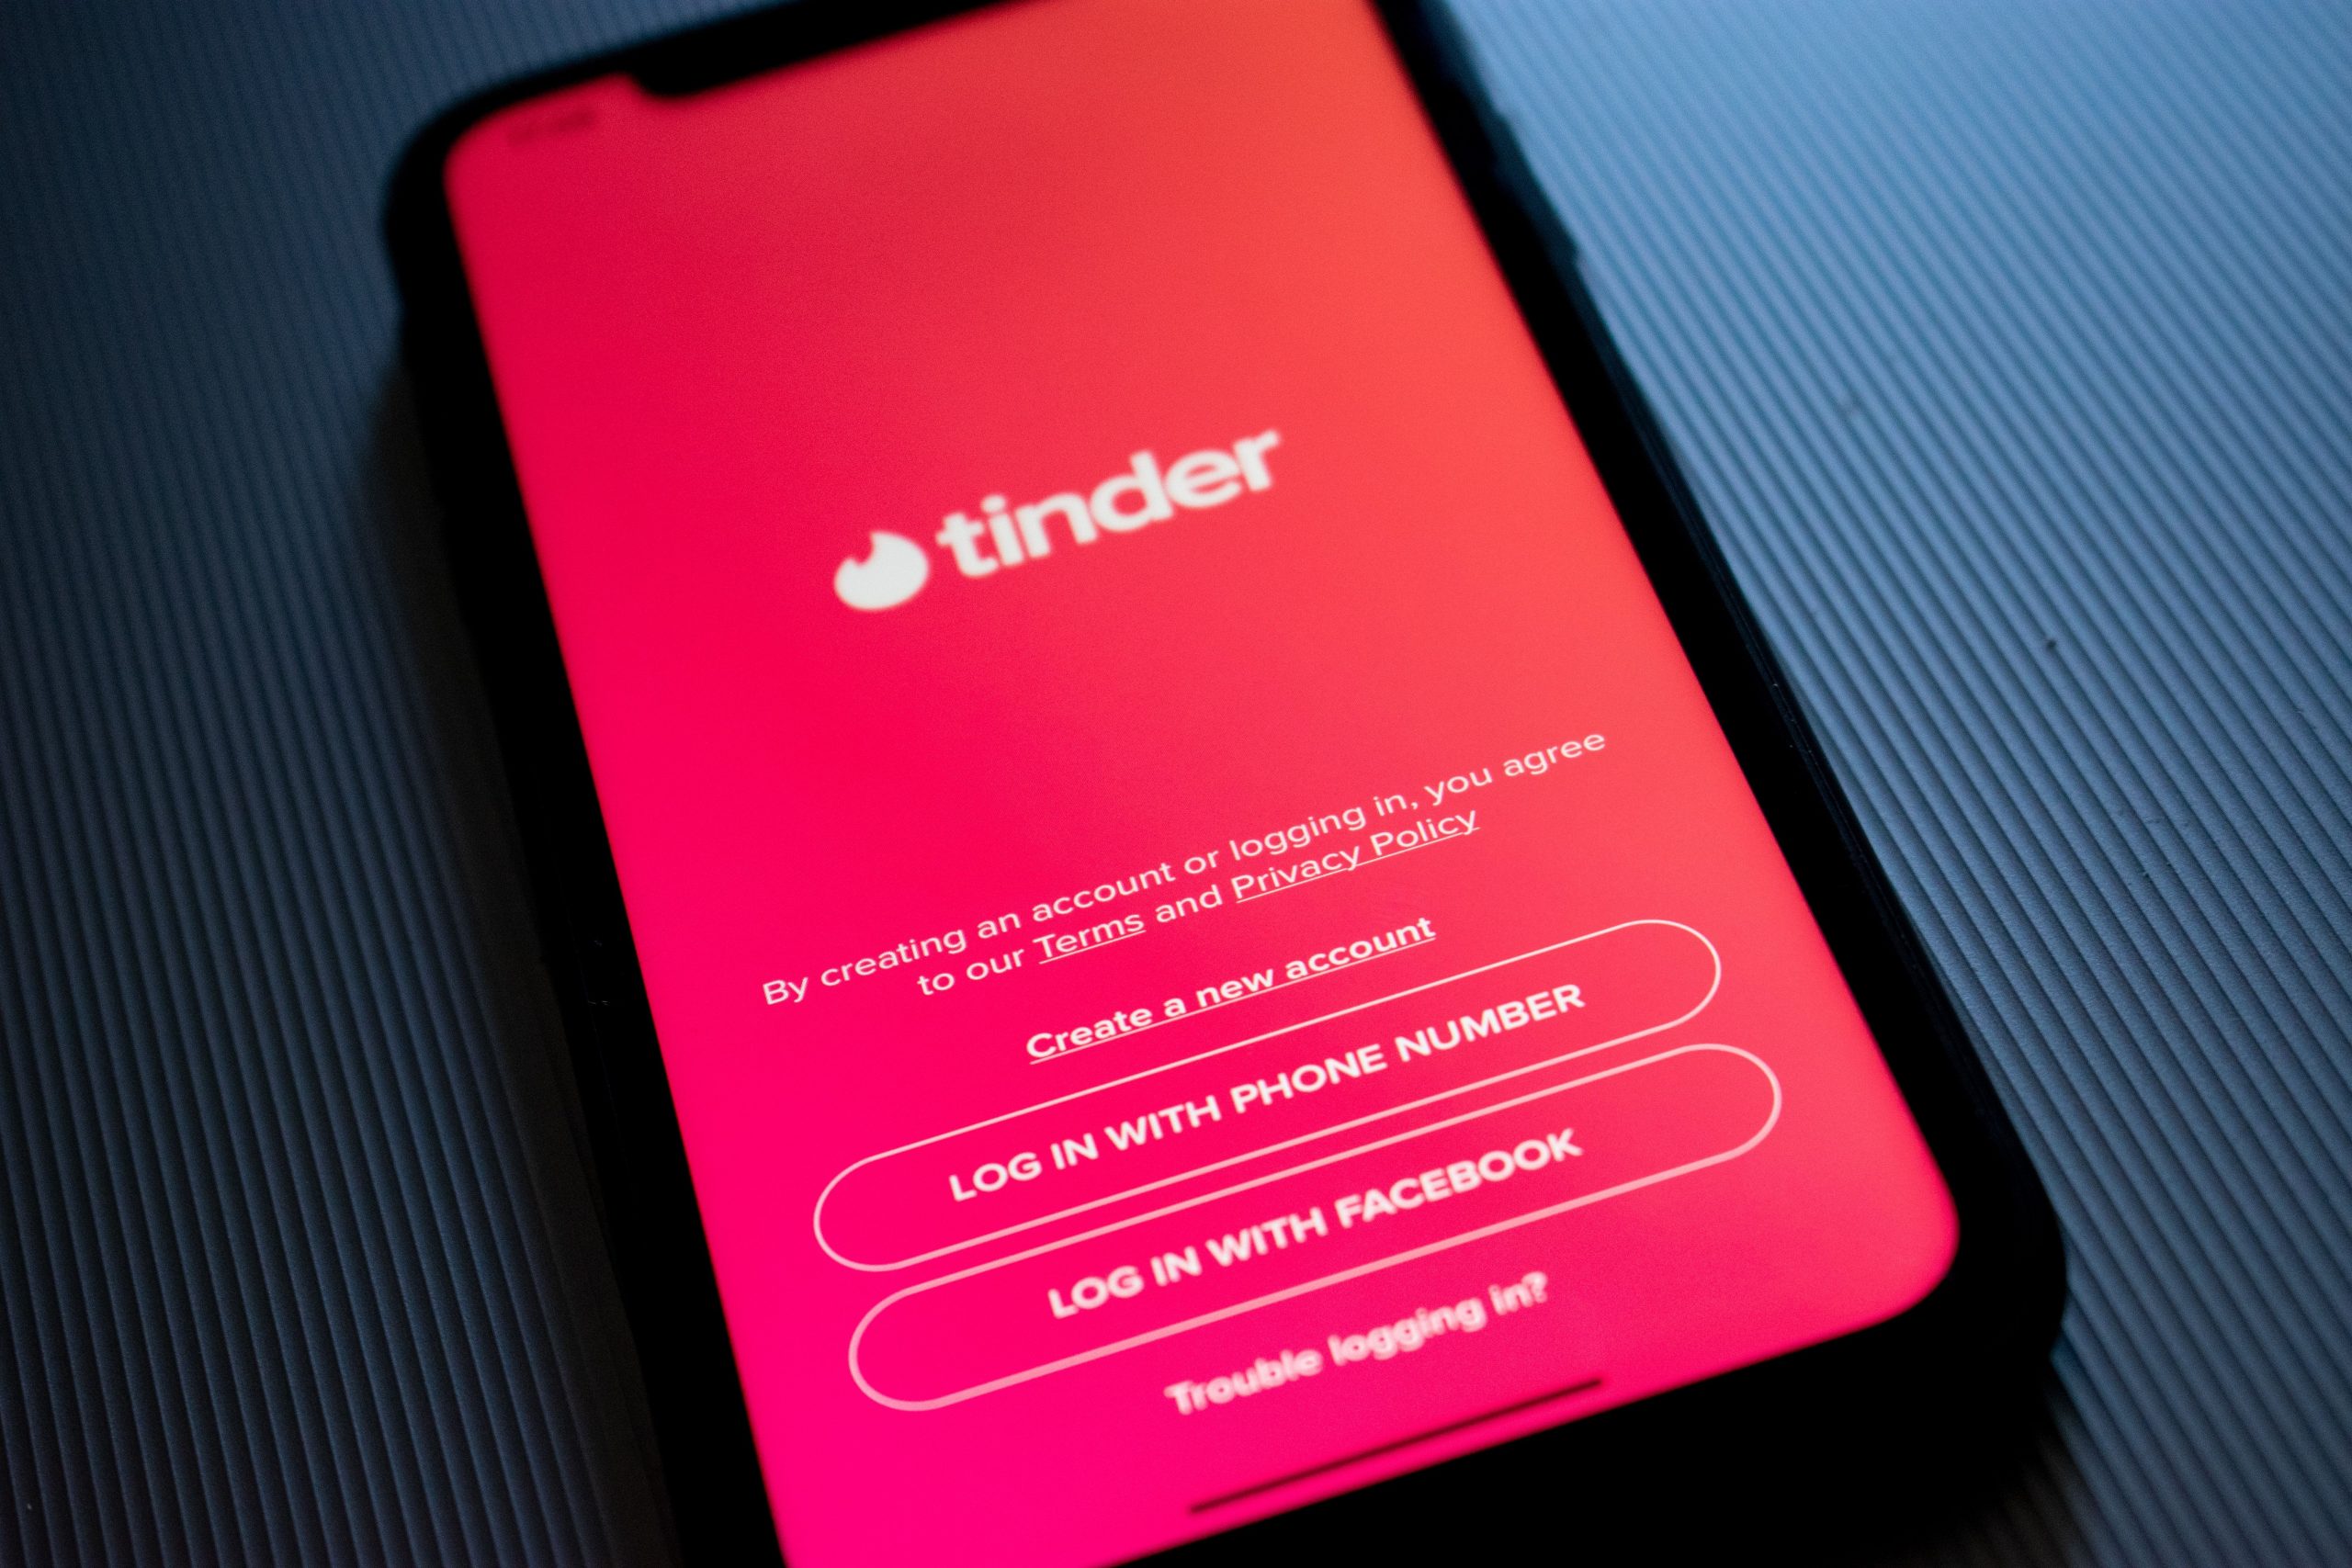 Pakistan blocks Tinder, other dating apps citing ‘immoral’ content